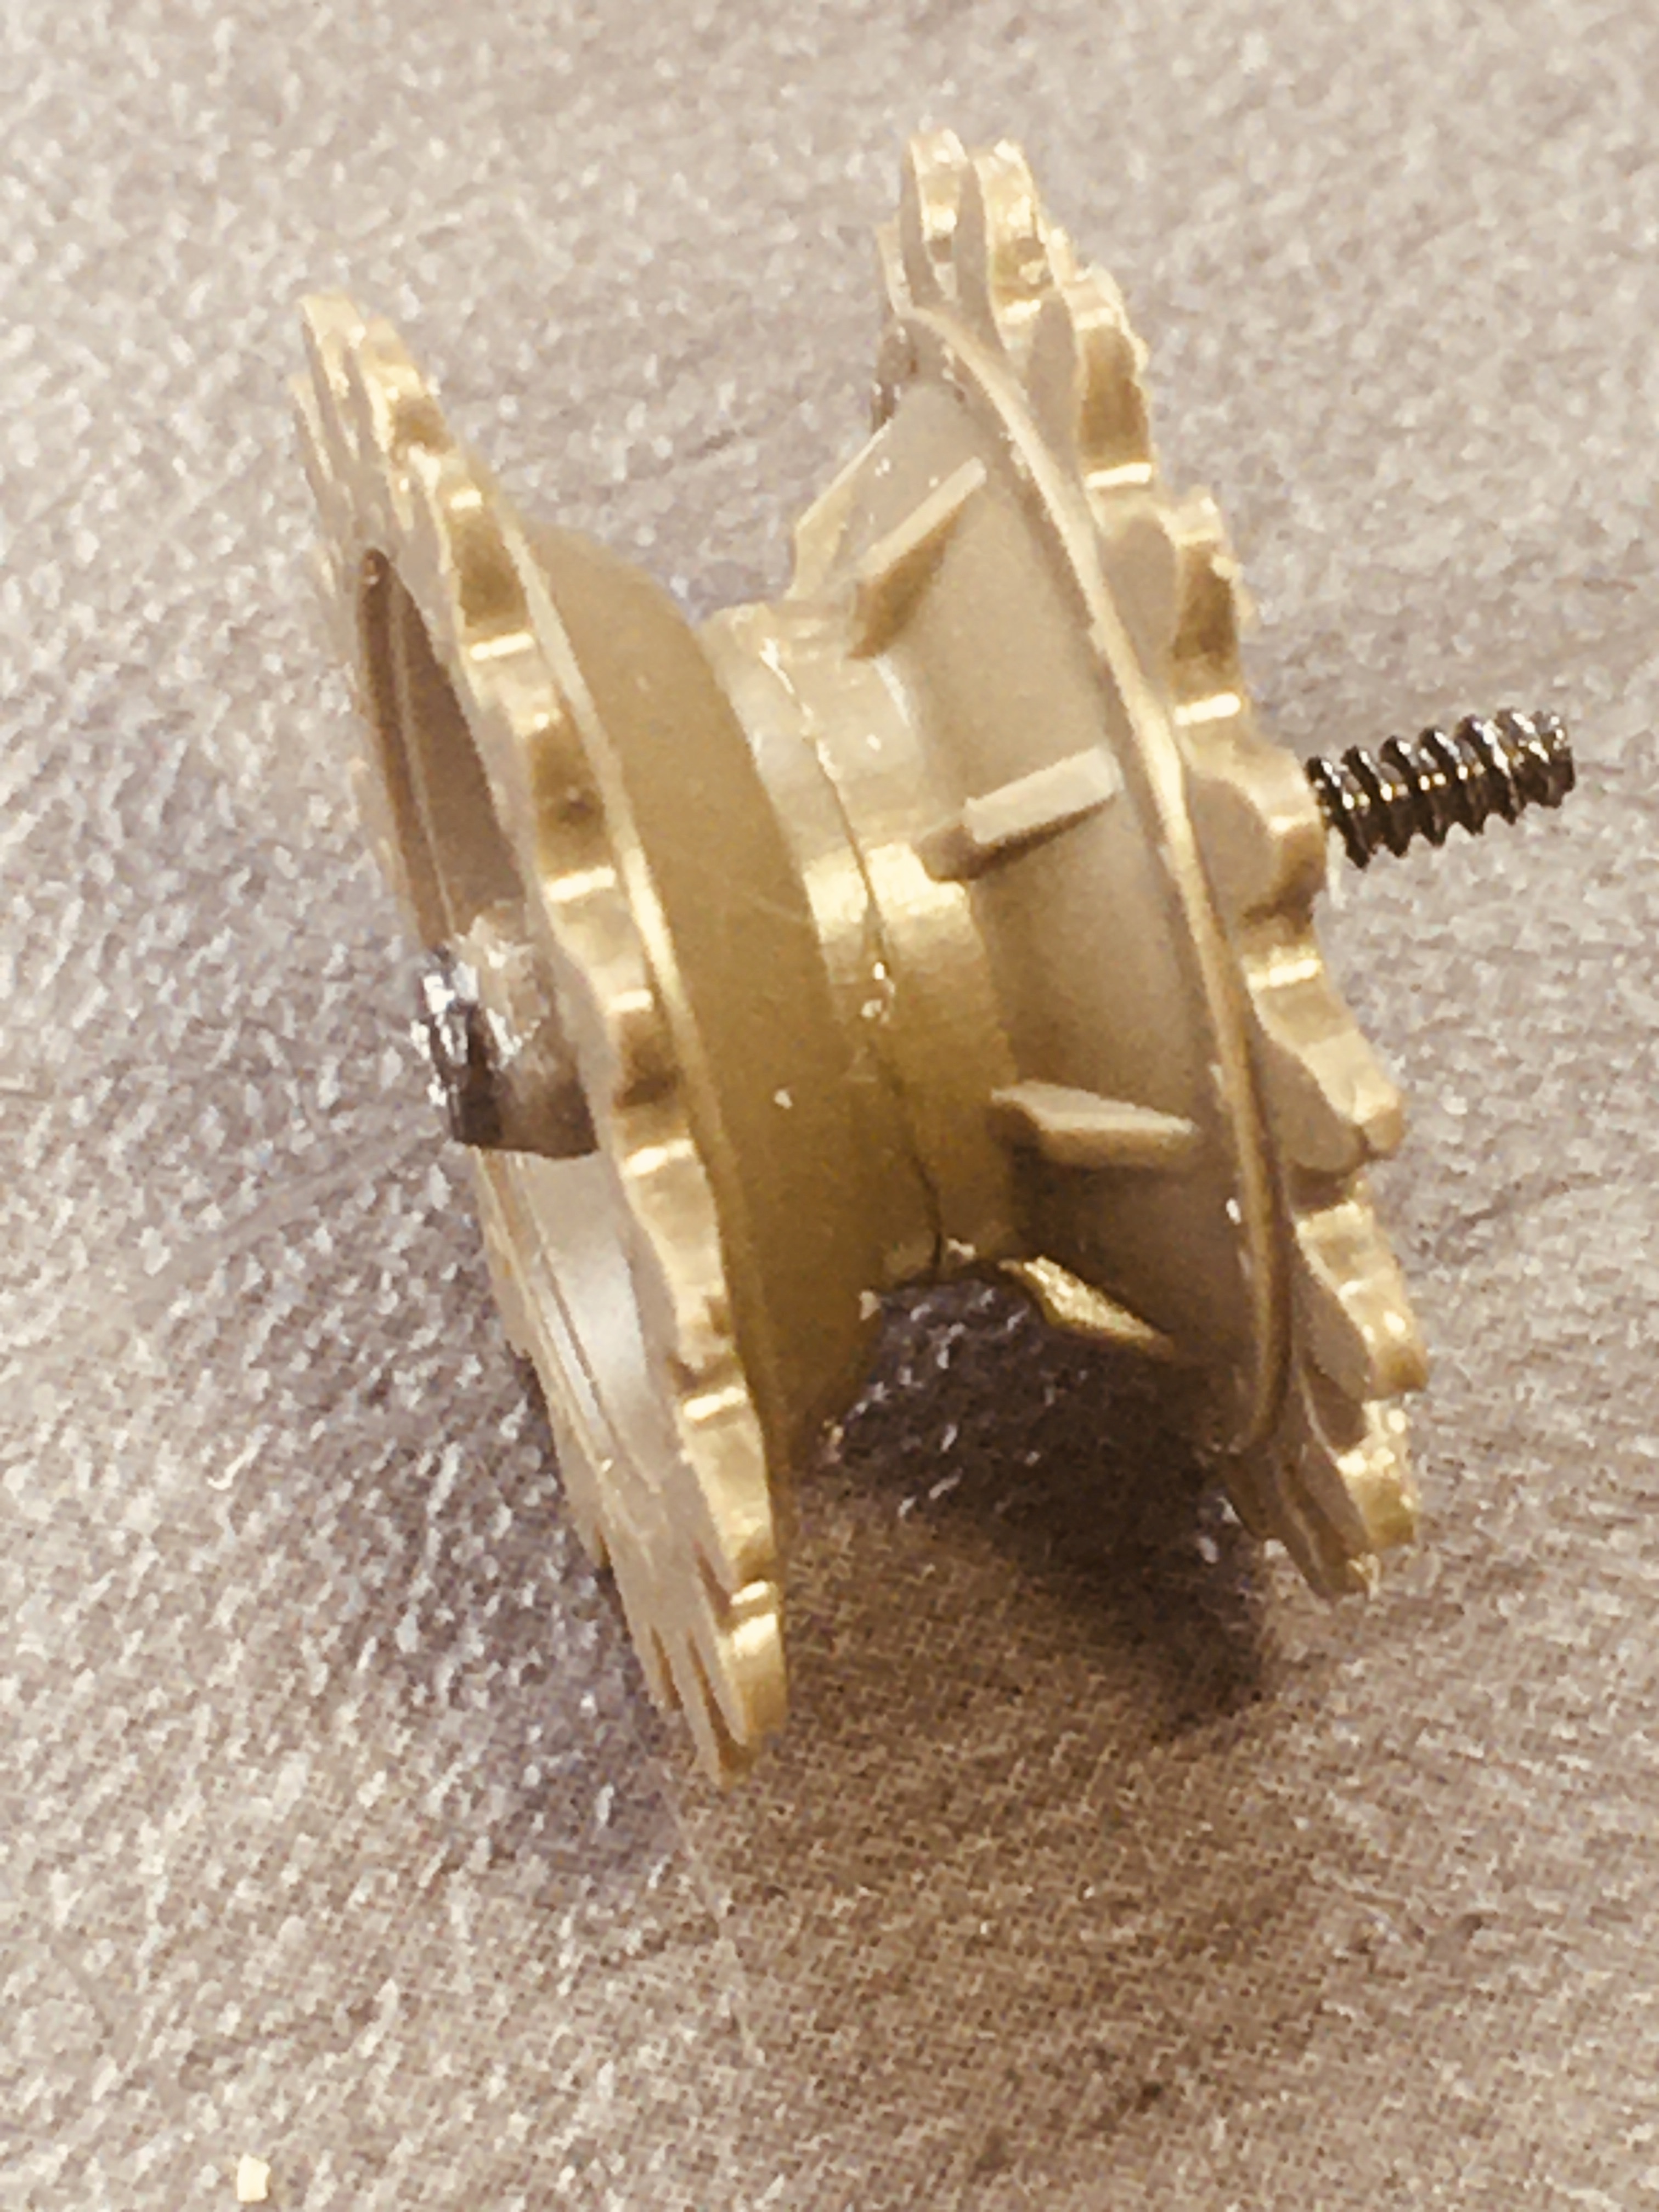 The T97 has drive sprockets that are offset to the ouside more than most so a long screw is required.